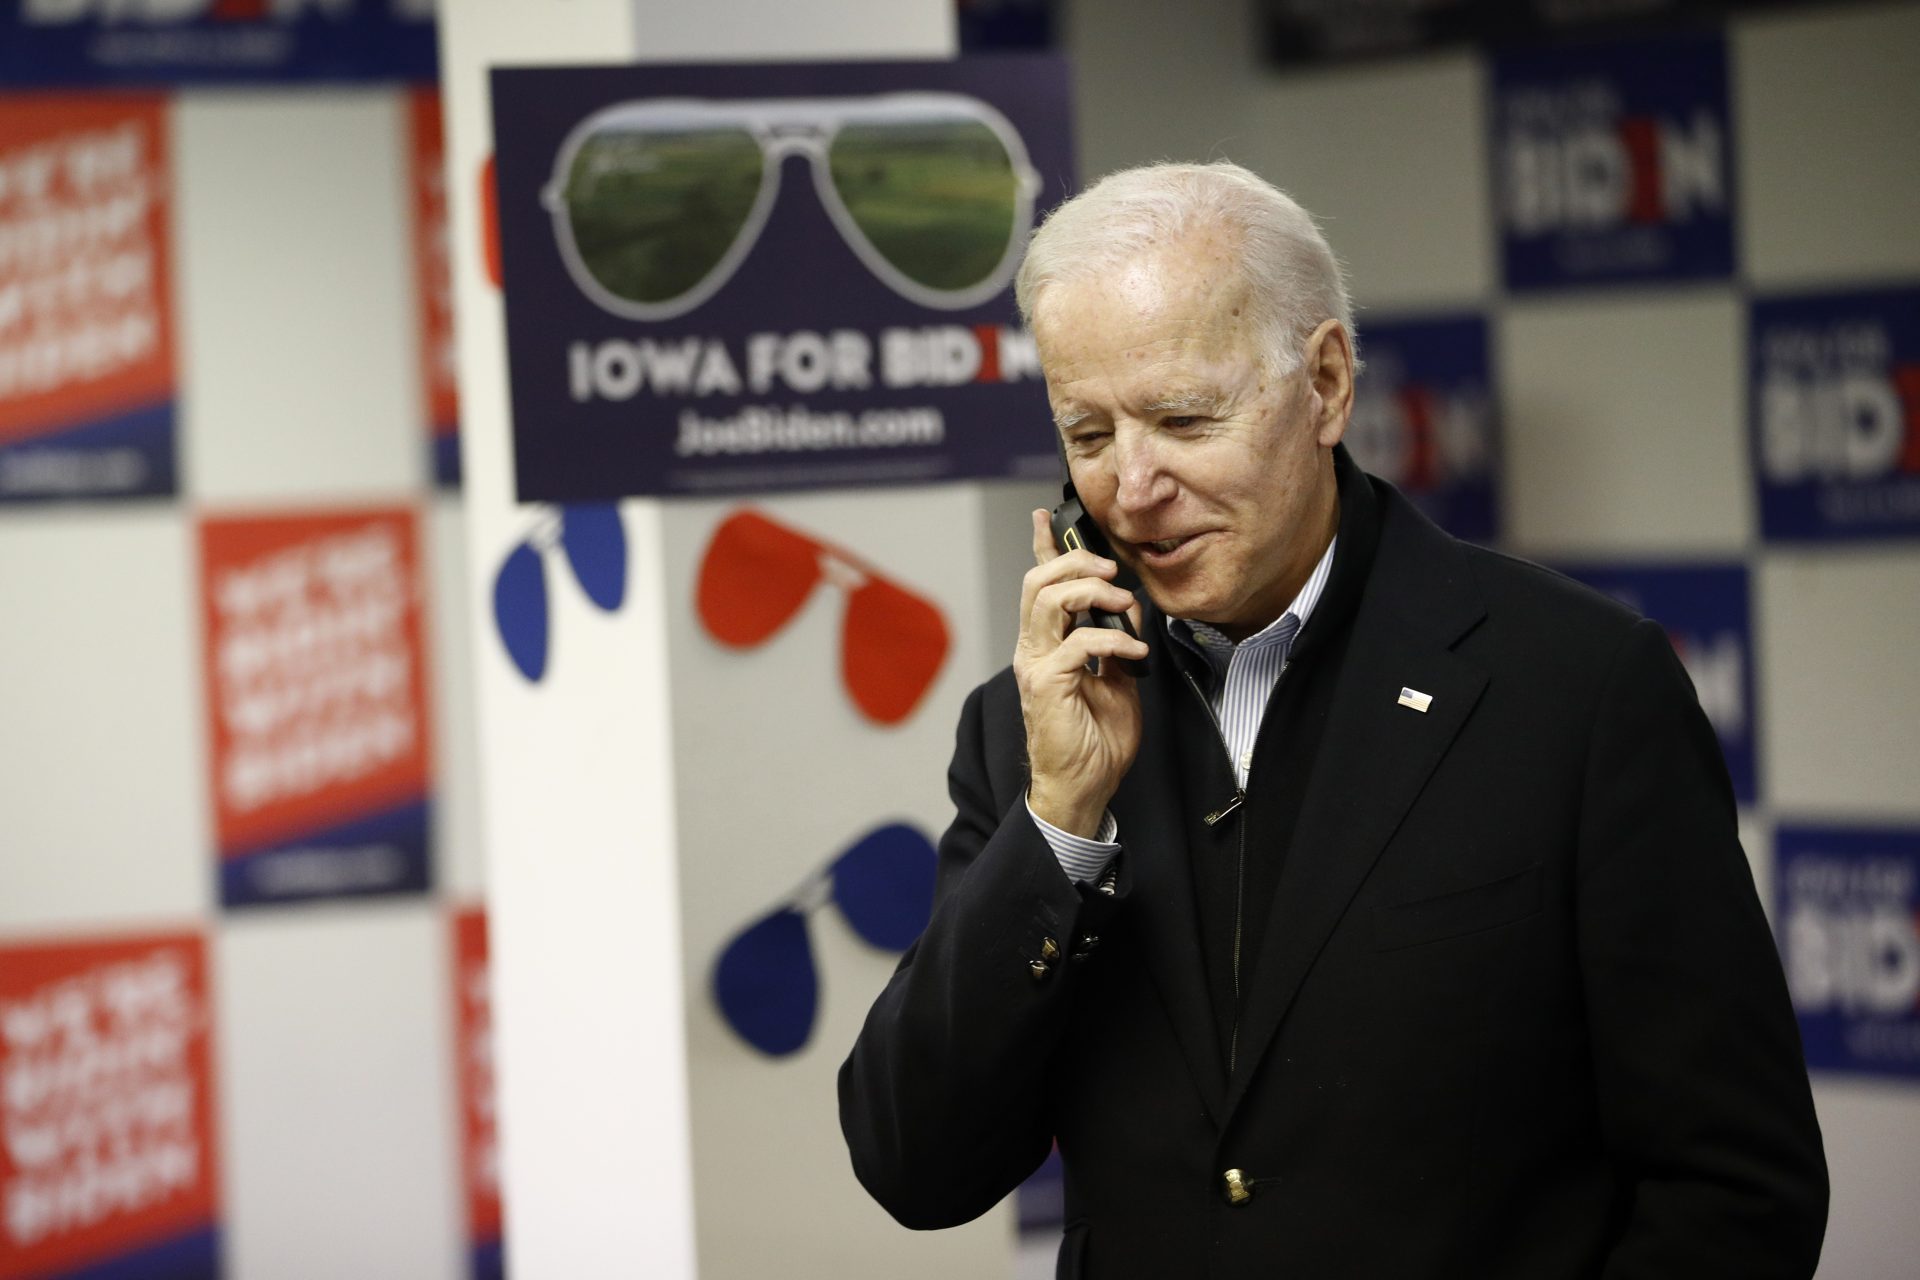 Democratic presidential candidate former Vice President Joe Biden speaks with a potential caucus-goer during a stop at a campaign field office, Monday, Jan. 13, 2020, in Des Moines, Iowa.